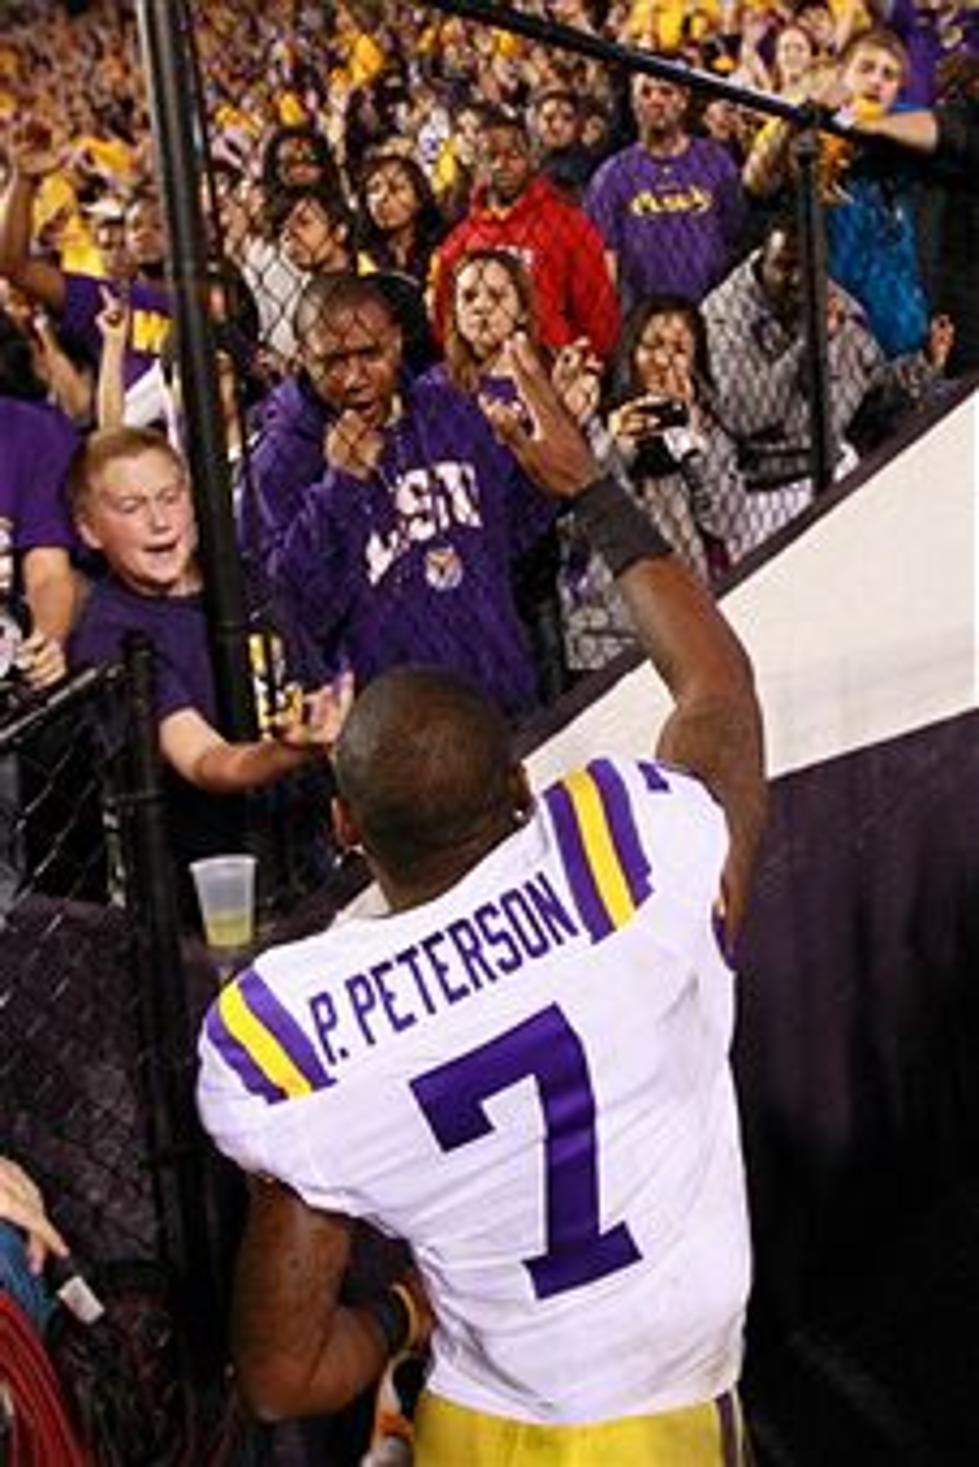 Former A&M coach says “agent” asked Aggies for $80K for Patrick Peterson